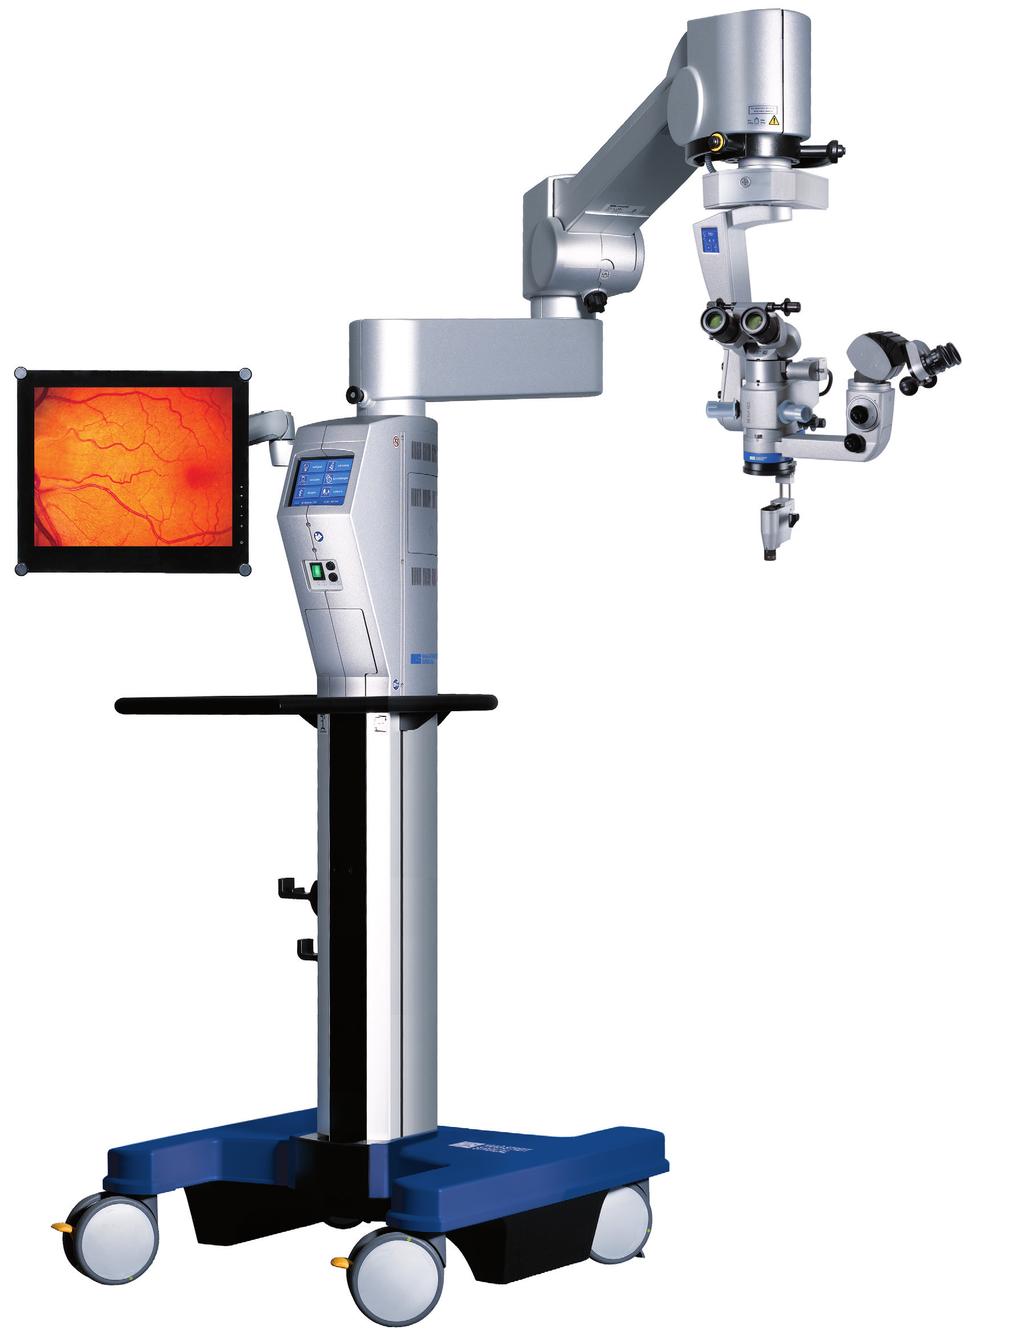 High-resolution monitor High-tech solutions Electromagnetic brakes in the floor stands FS 2-21 (halogen) and FS 2-25 (LED) support the smooth movements of the microscope and stable working